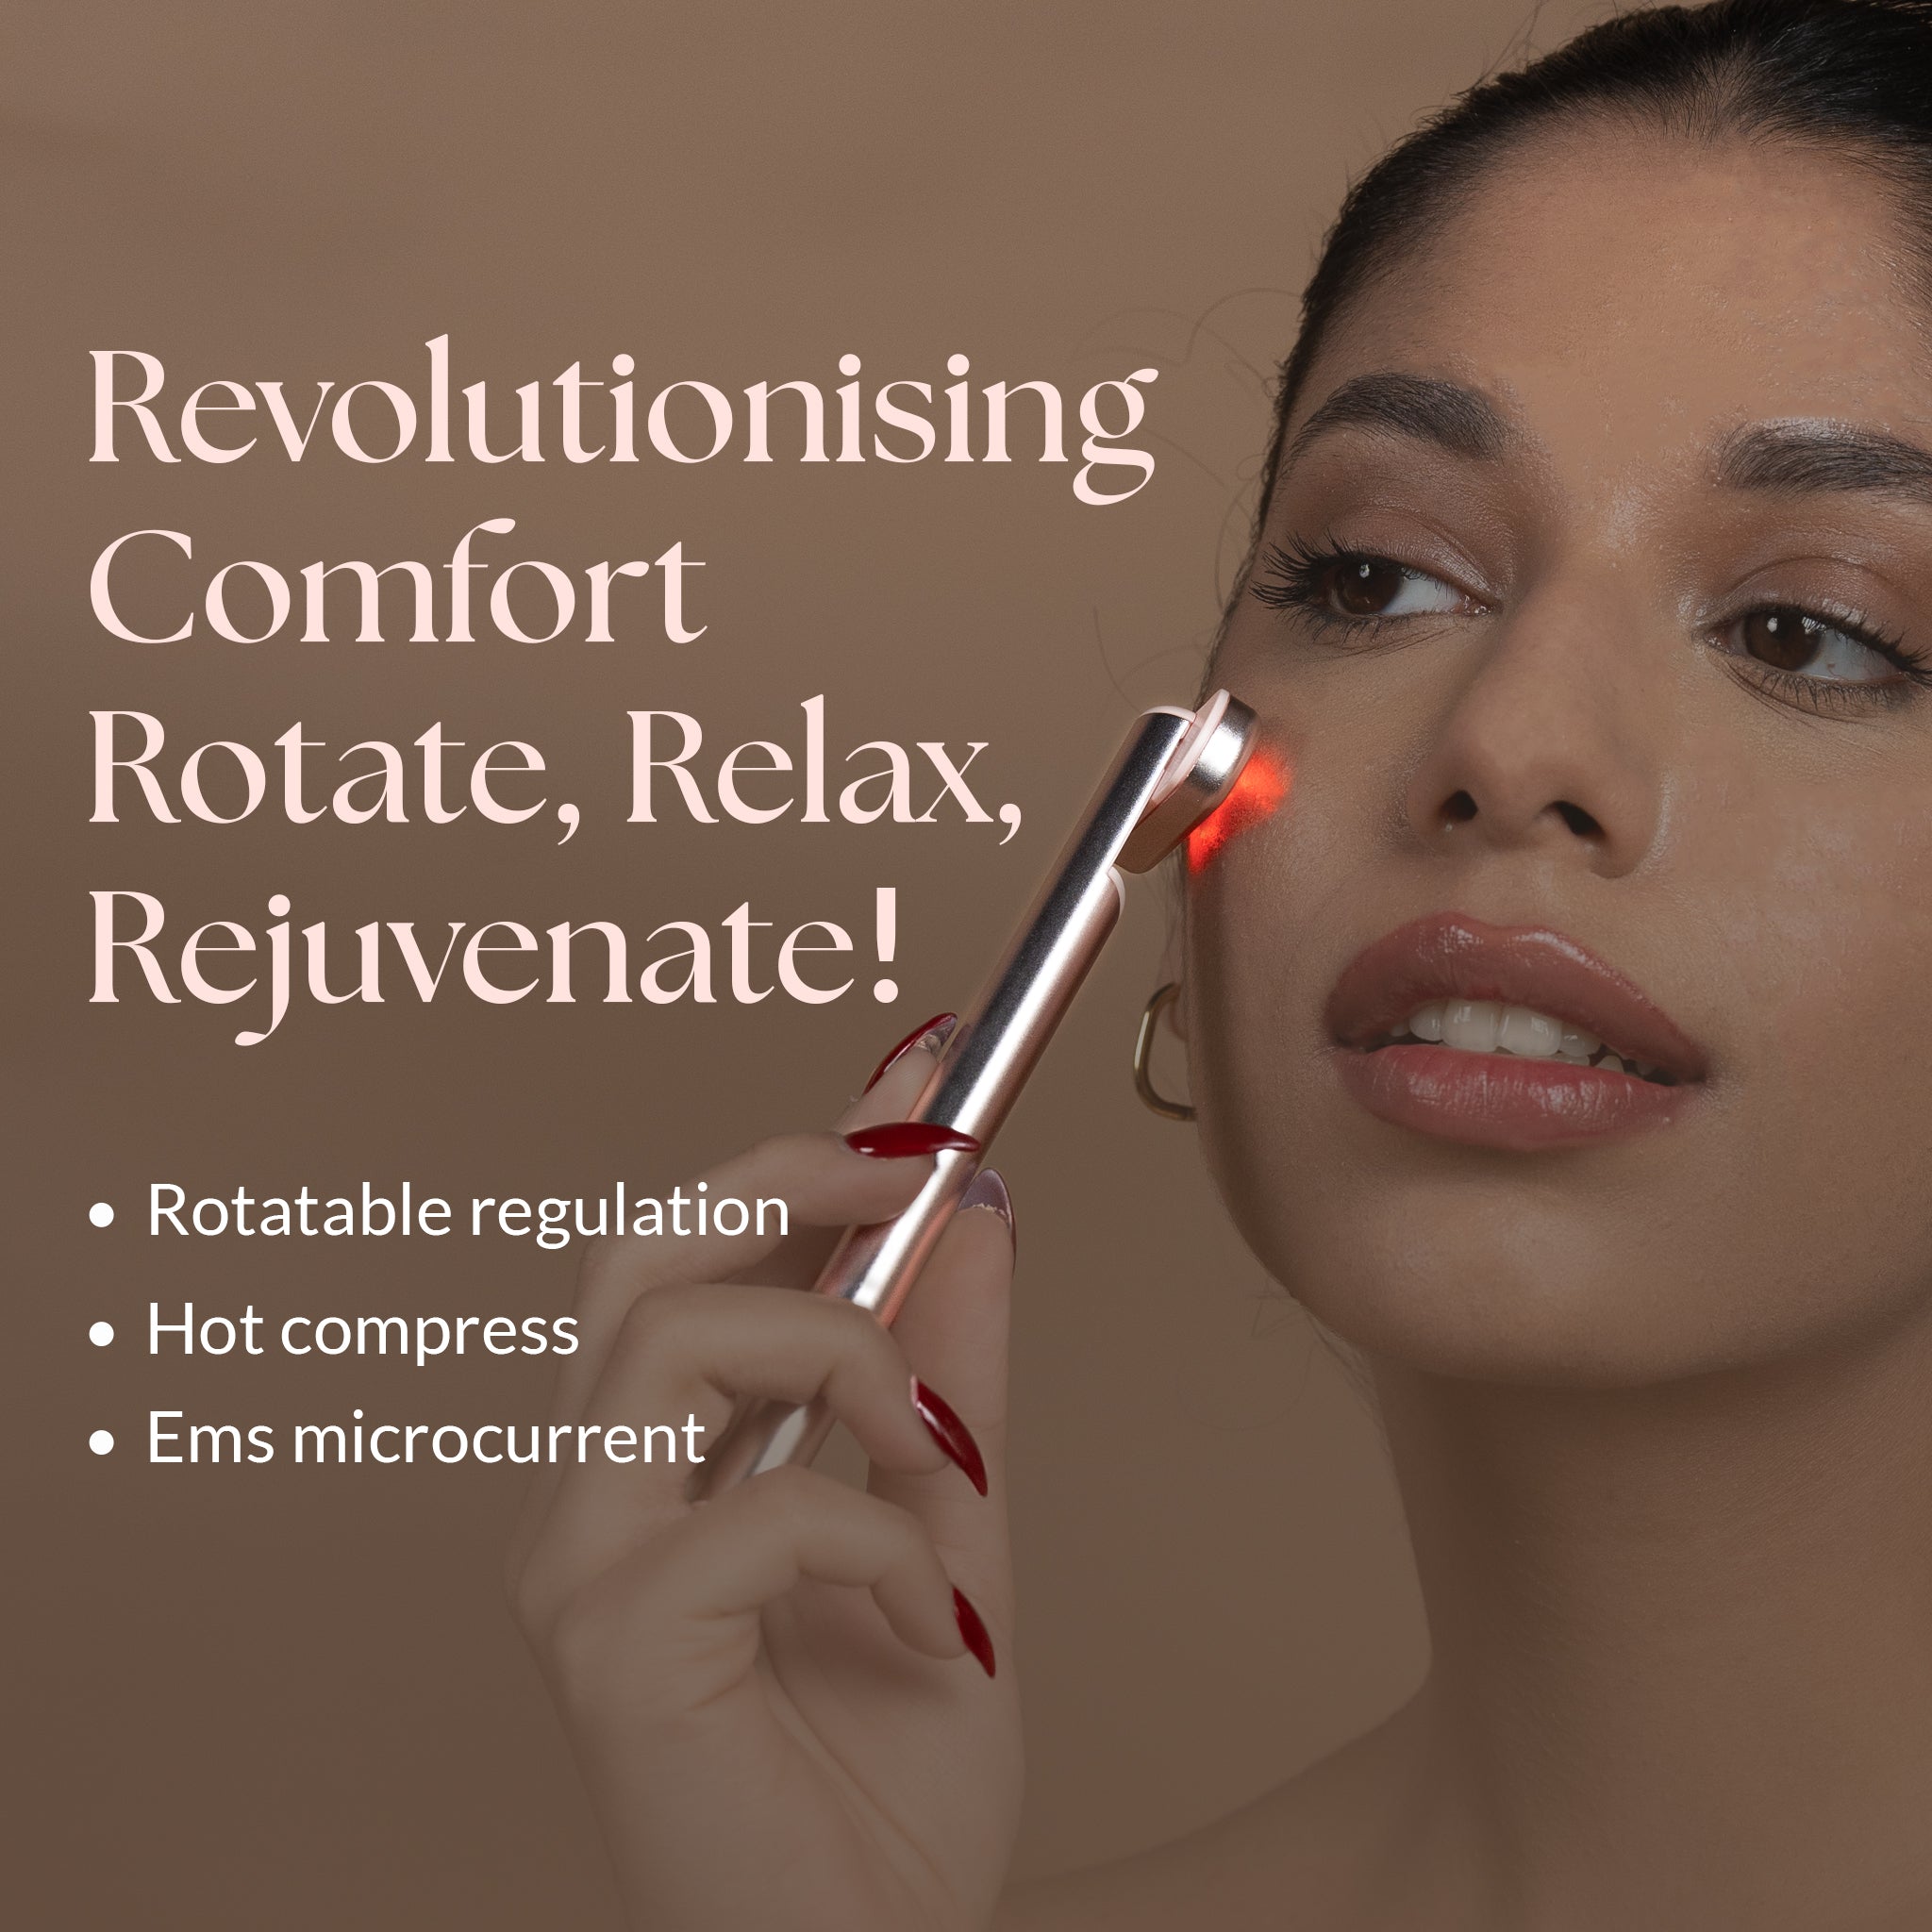 Red Light Therapy Wand